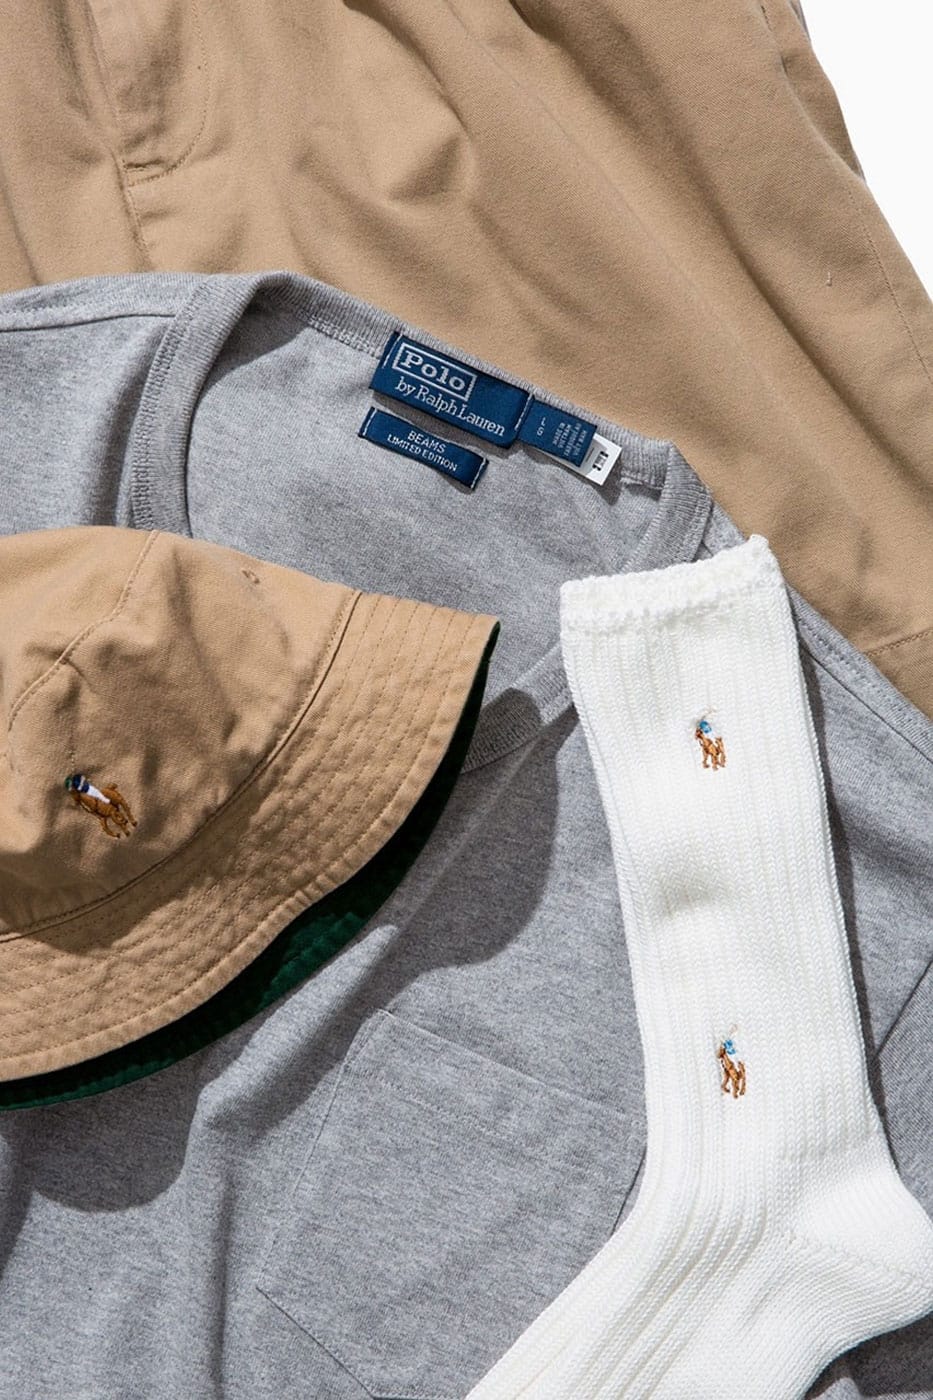 BEAMS Releases Its Eighth Capsule Collection With Polo Ralph